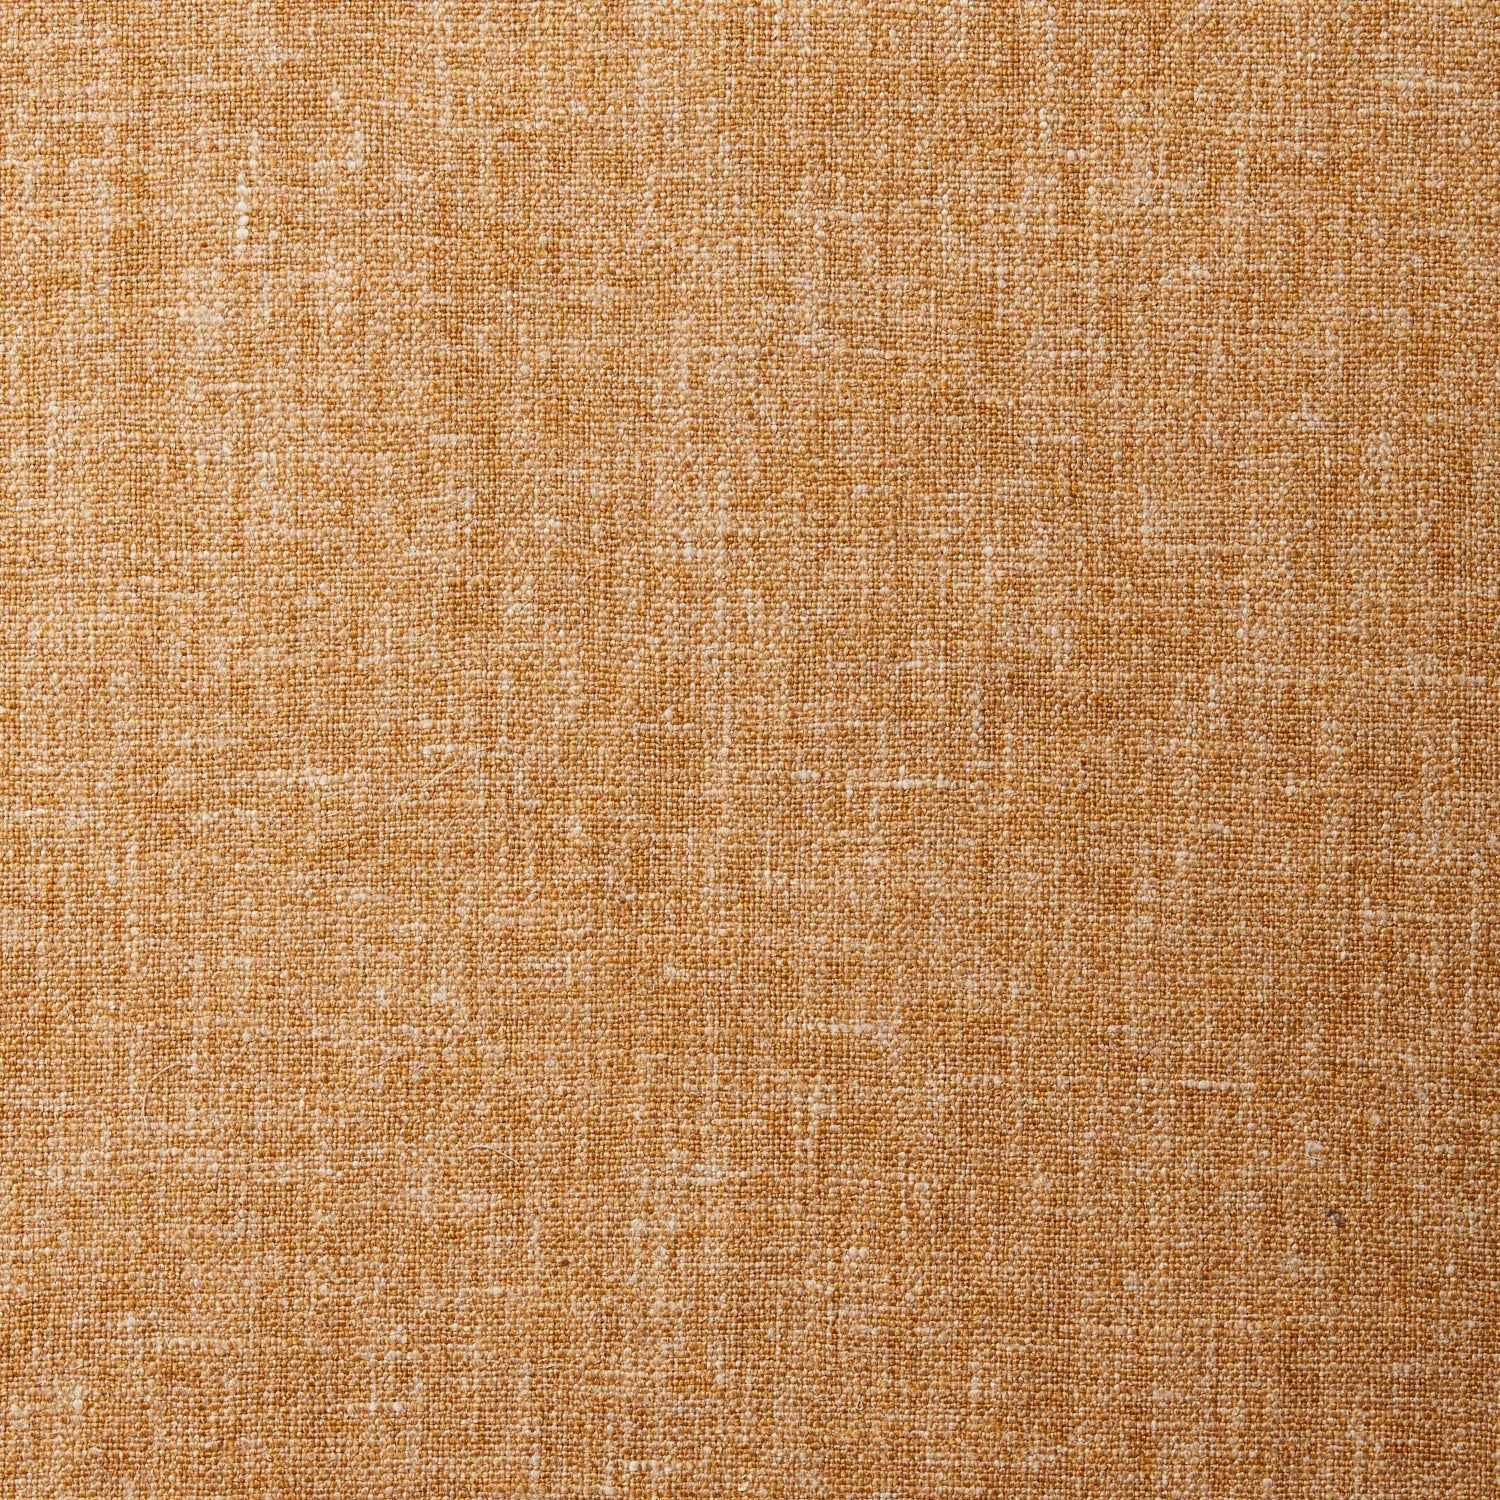 A swatch of blended linen fabric in a mottled mustard color.